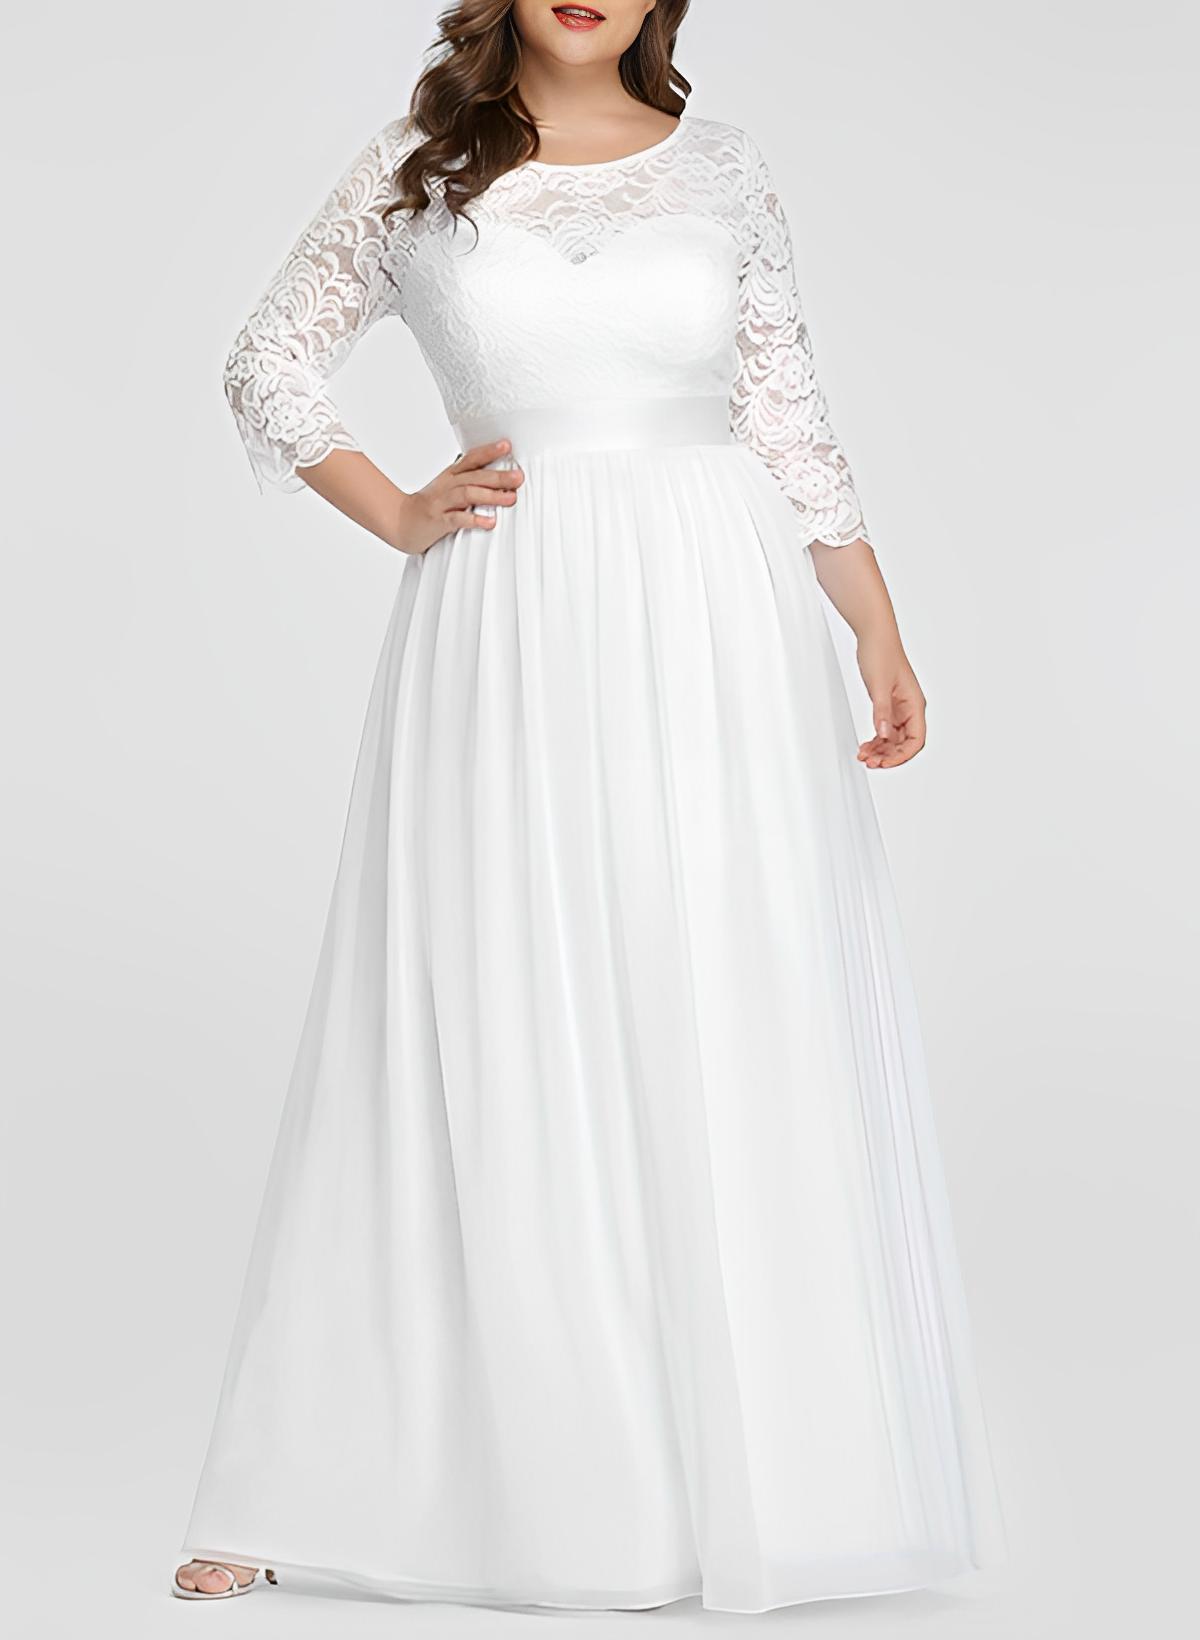 Plus Size Wedding Dresses With A-Line Floor-Length 3/4 Length Sleeves Lace Bridal Gowns